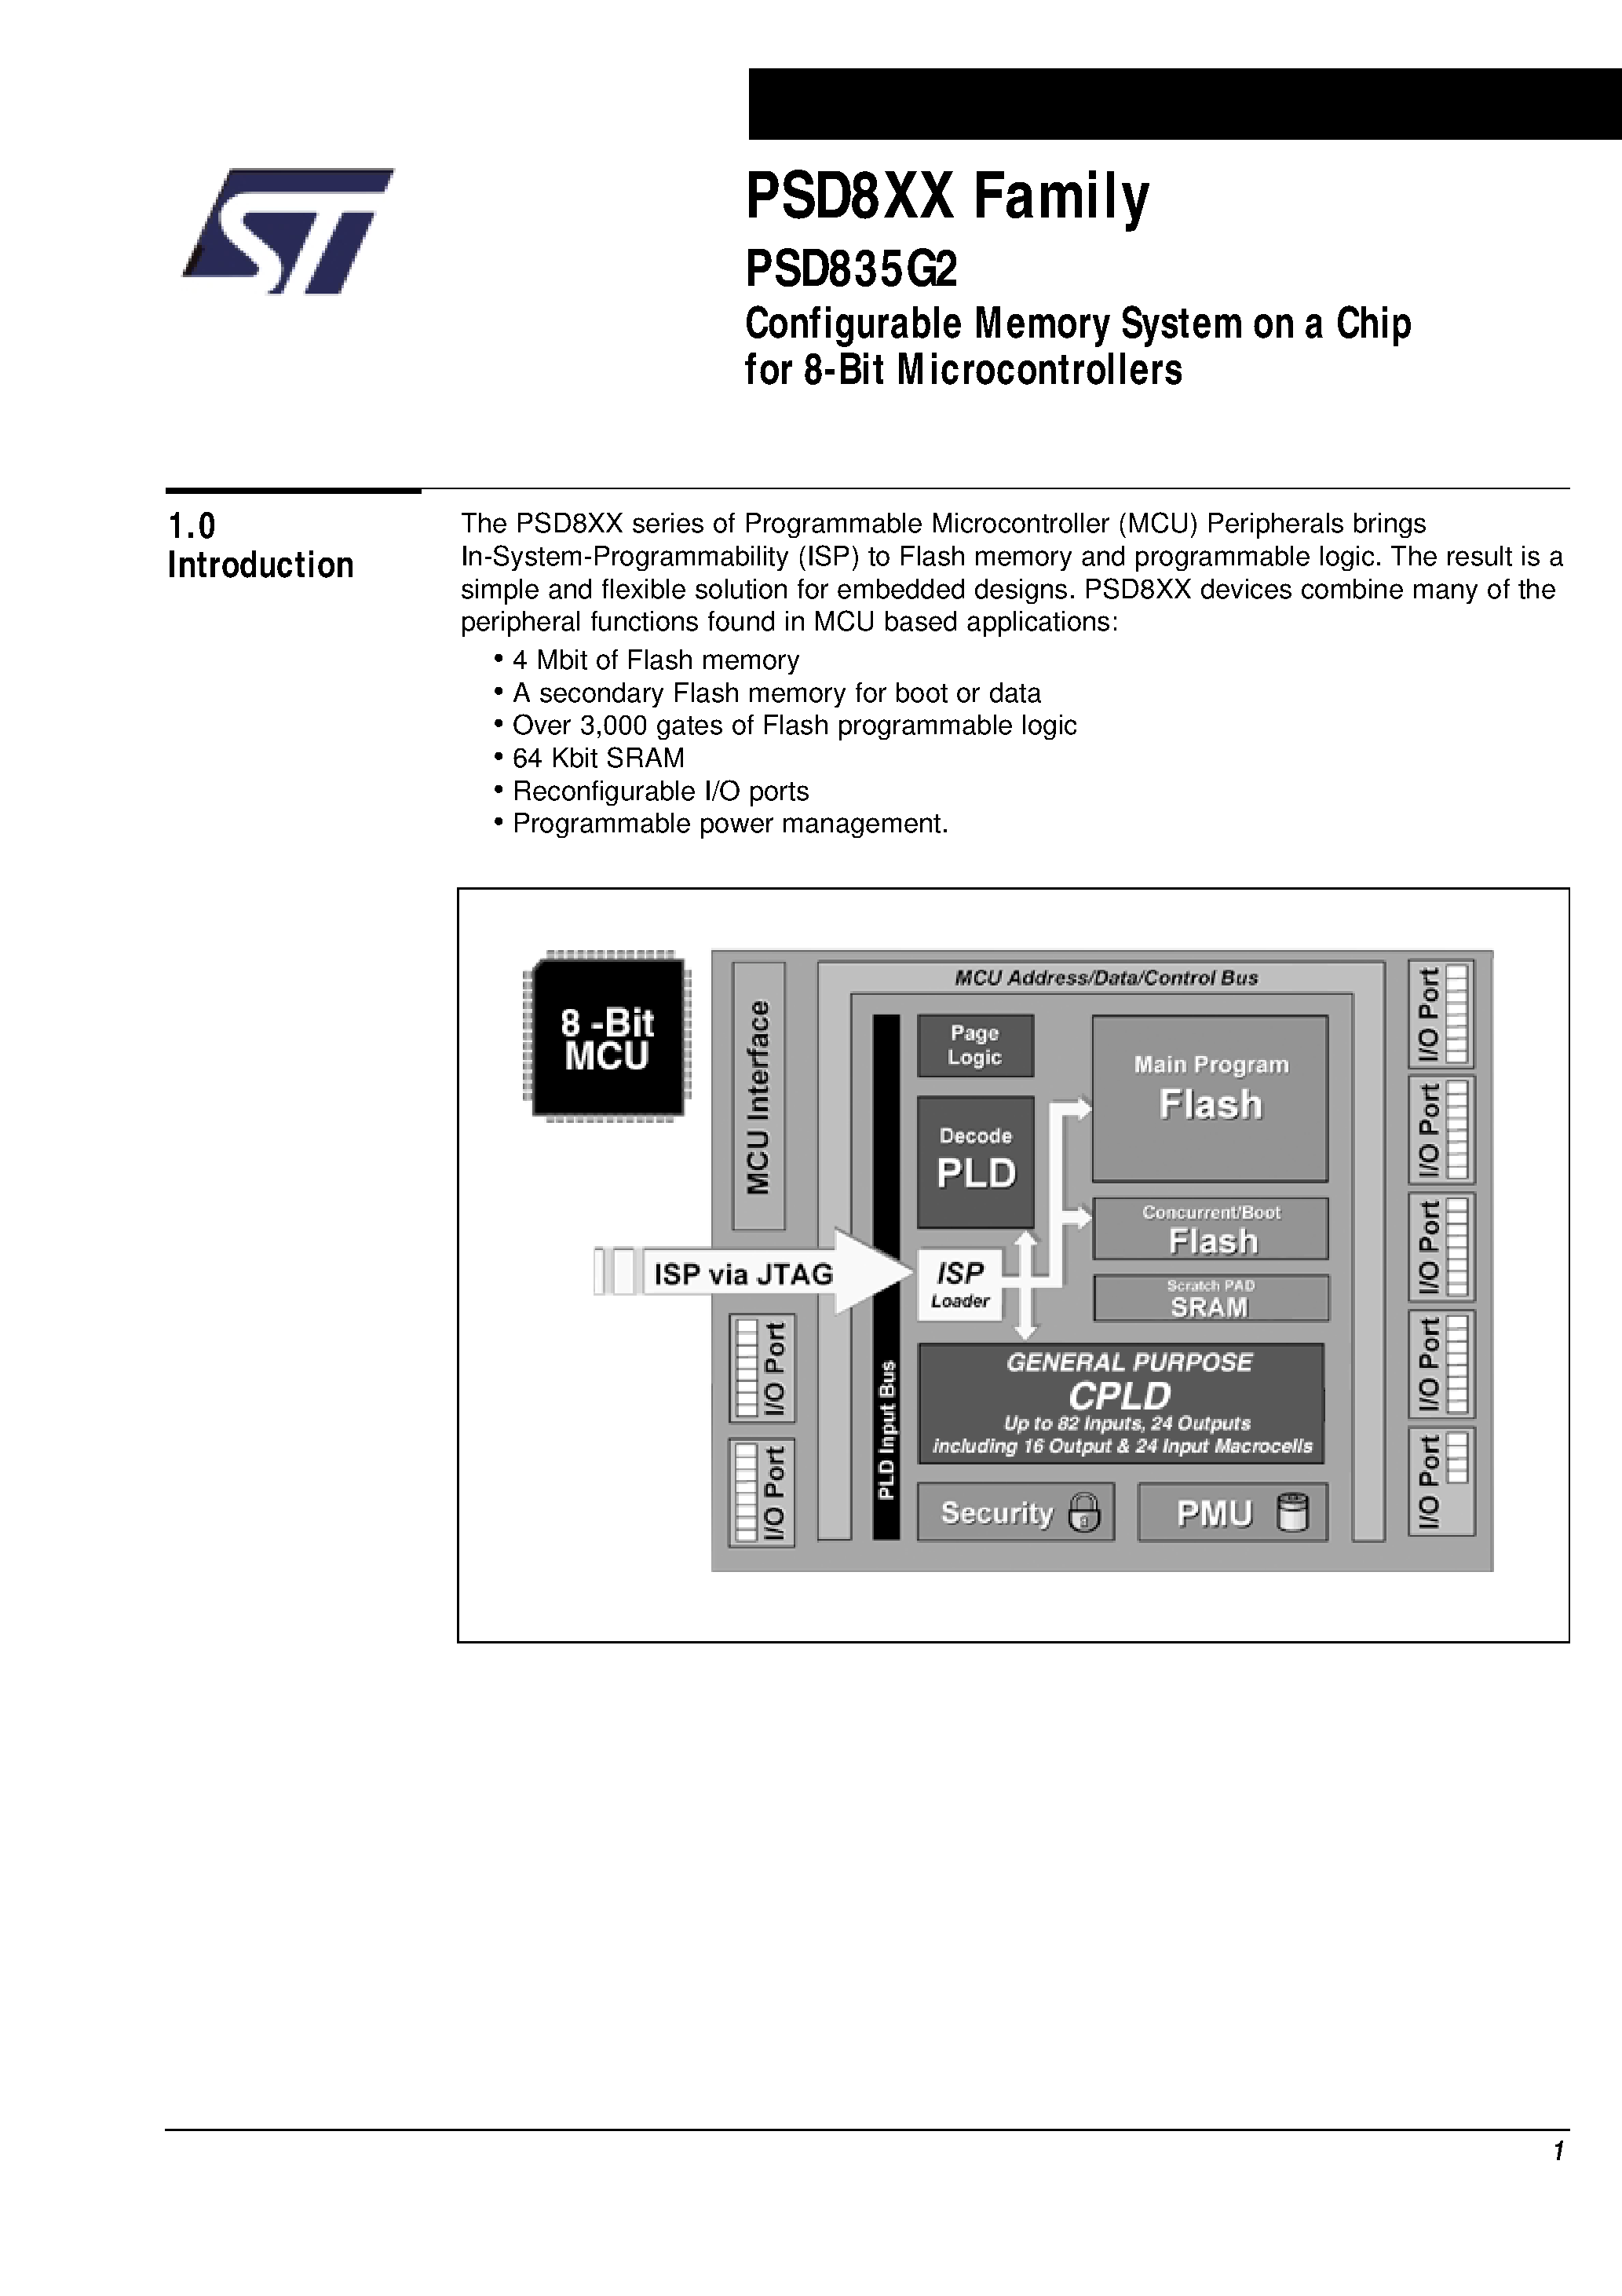 Datasheet PSD835F1-A-90M - Configurable Memory System on a Chip for 8-Bit Microcontrollers page 2